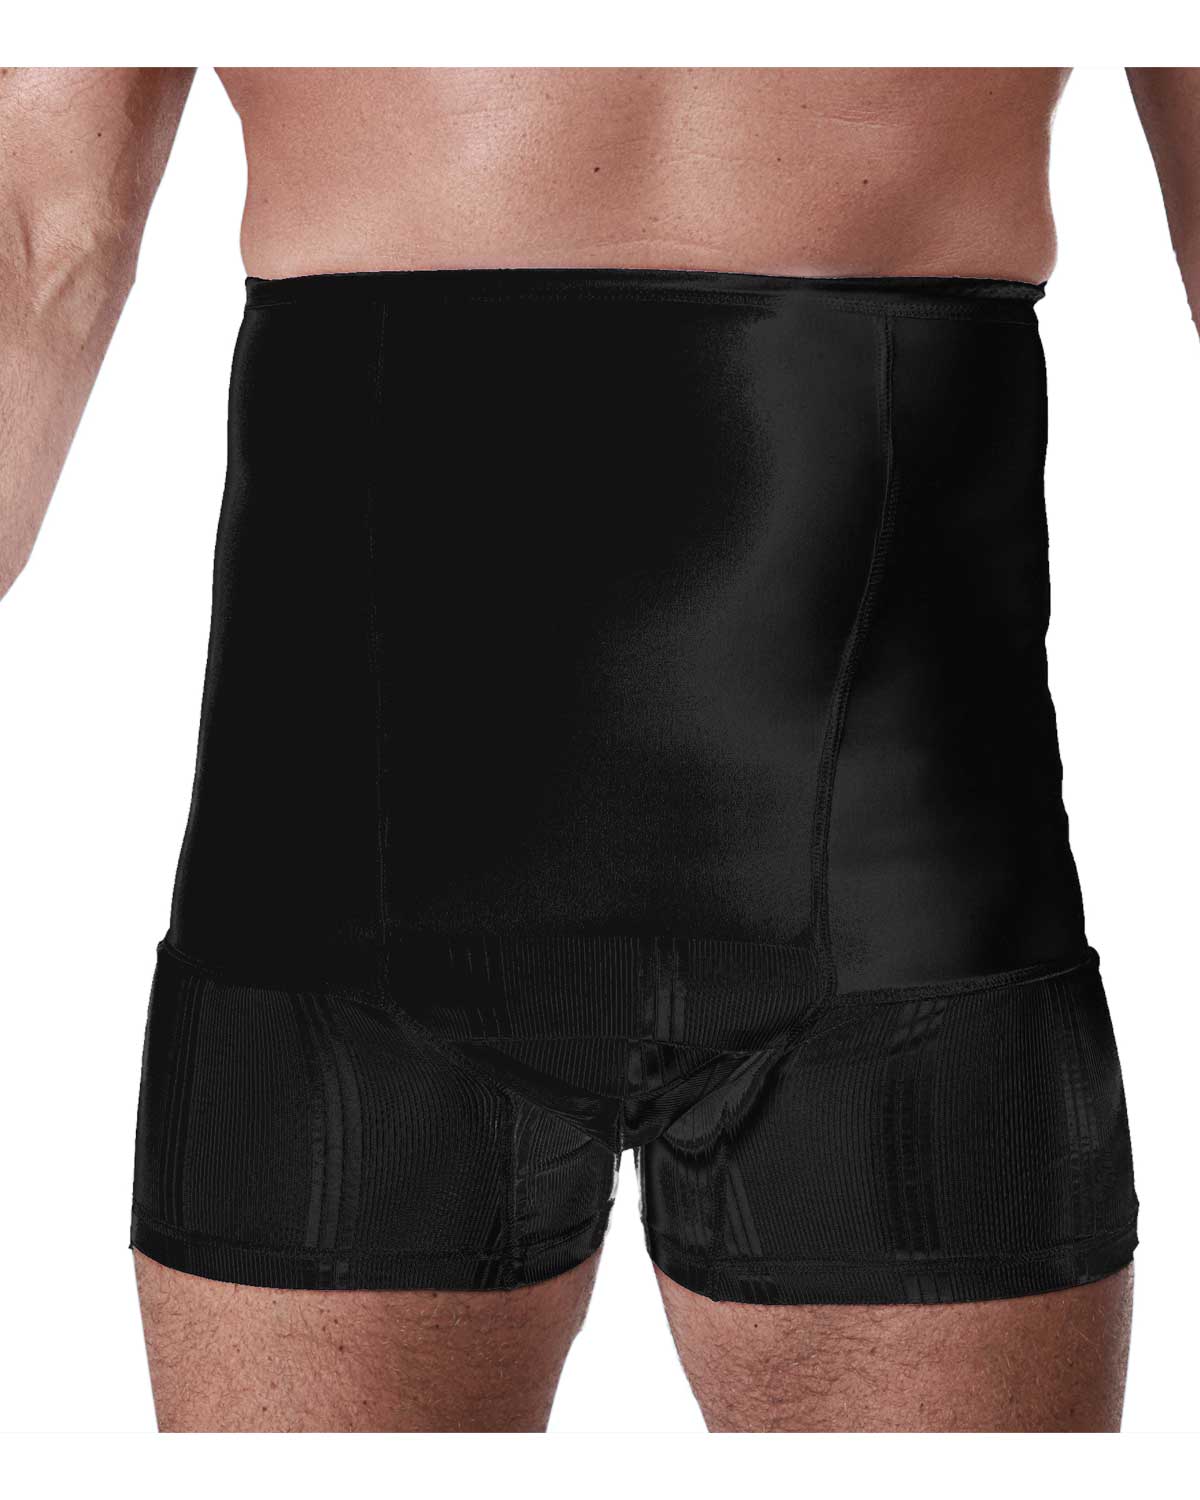 Rear and Hip Padded Brief. Men Compression Shirts, Girdles, Chest Binders,  Hernia Garments